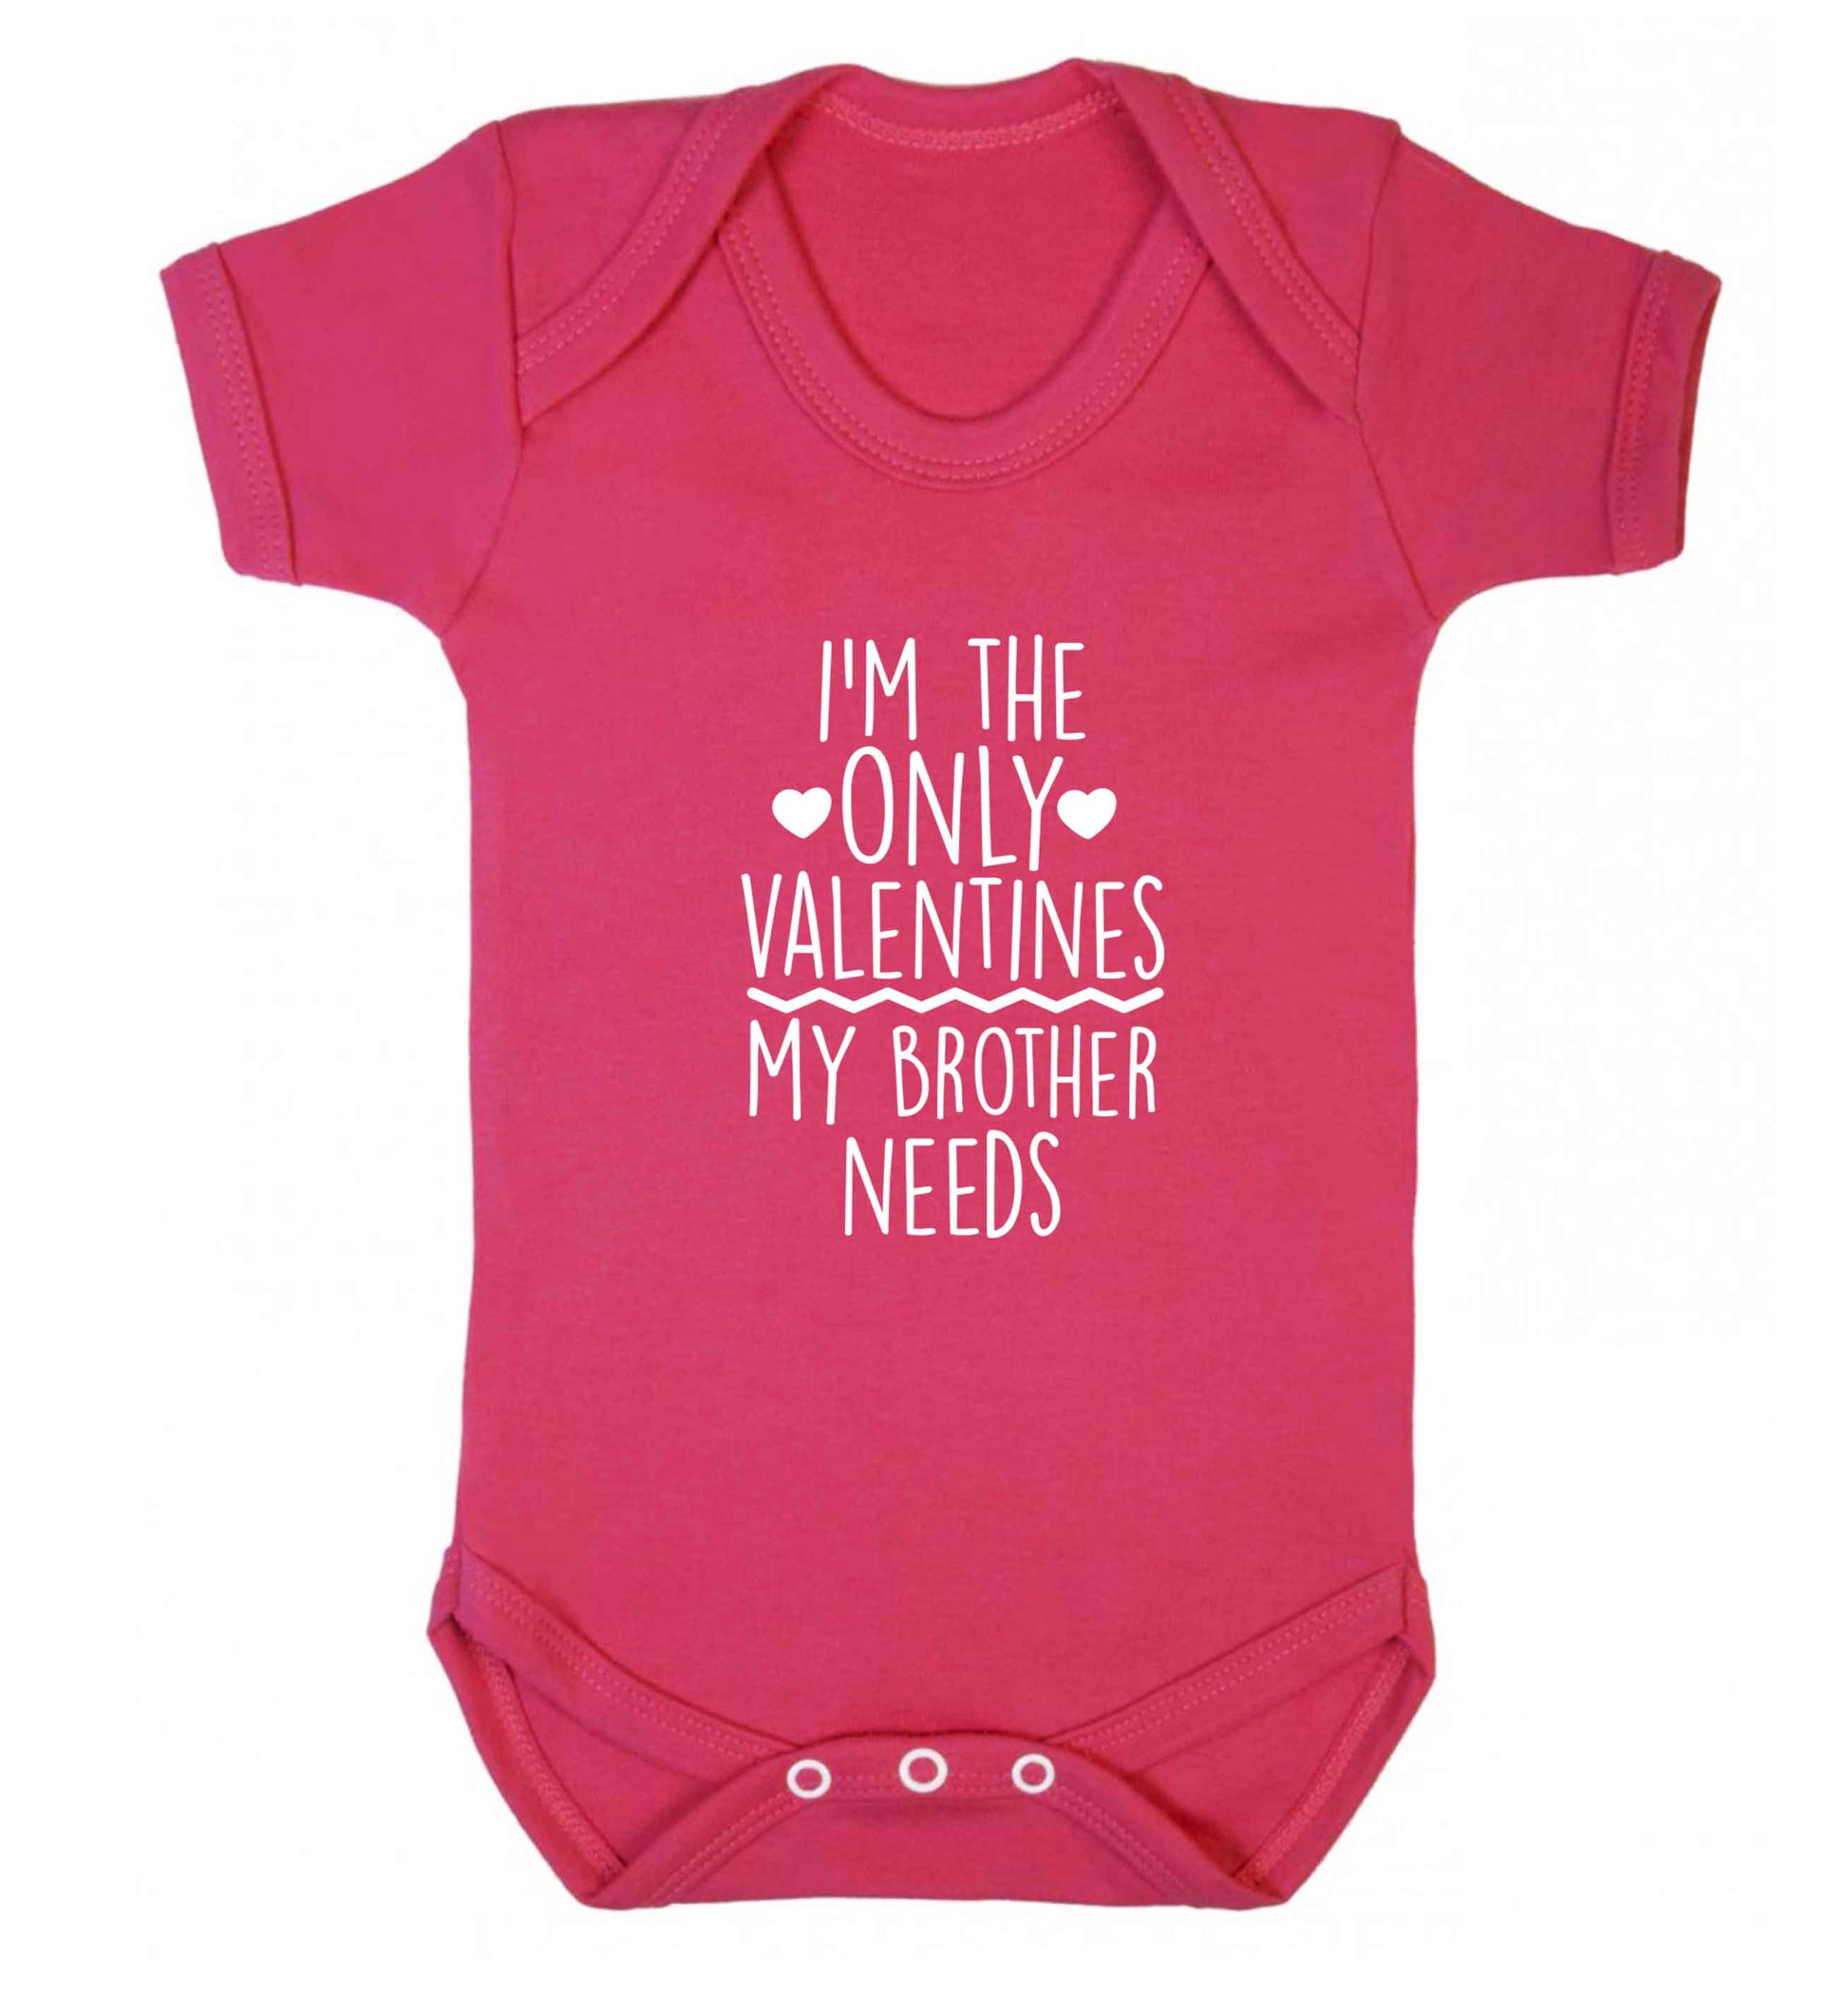 I'm the only valentines my brother needs baby vest dark pink 18-24 months